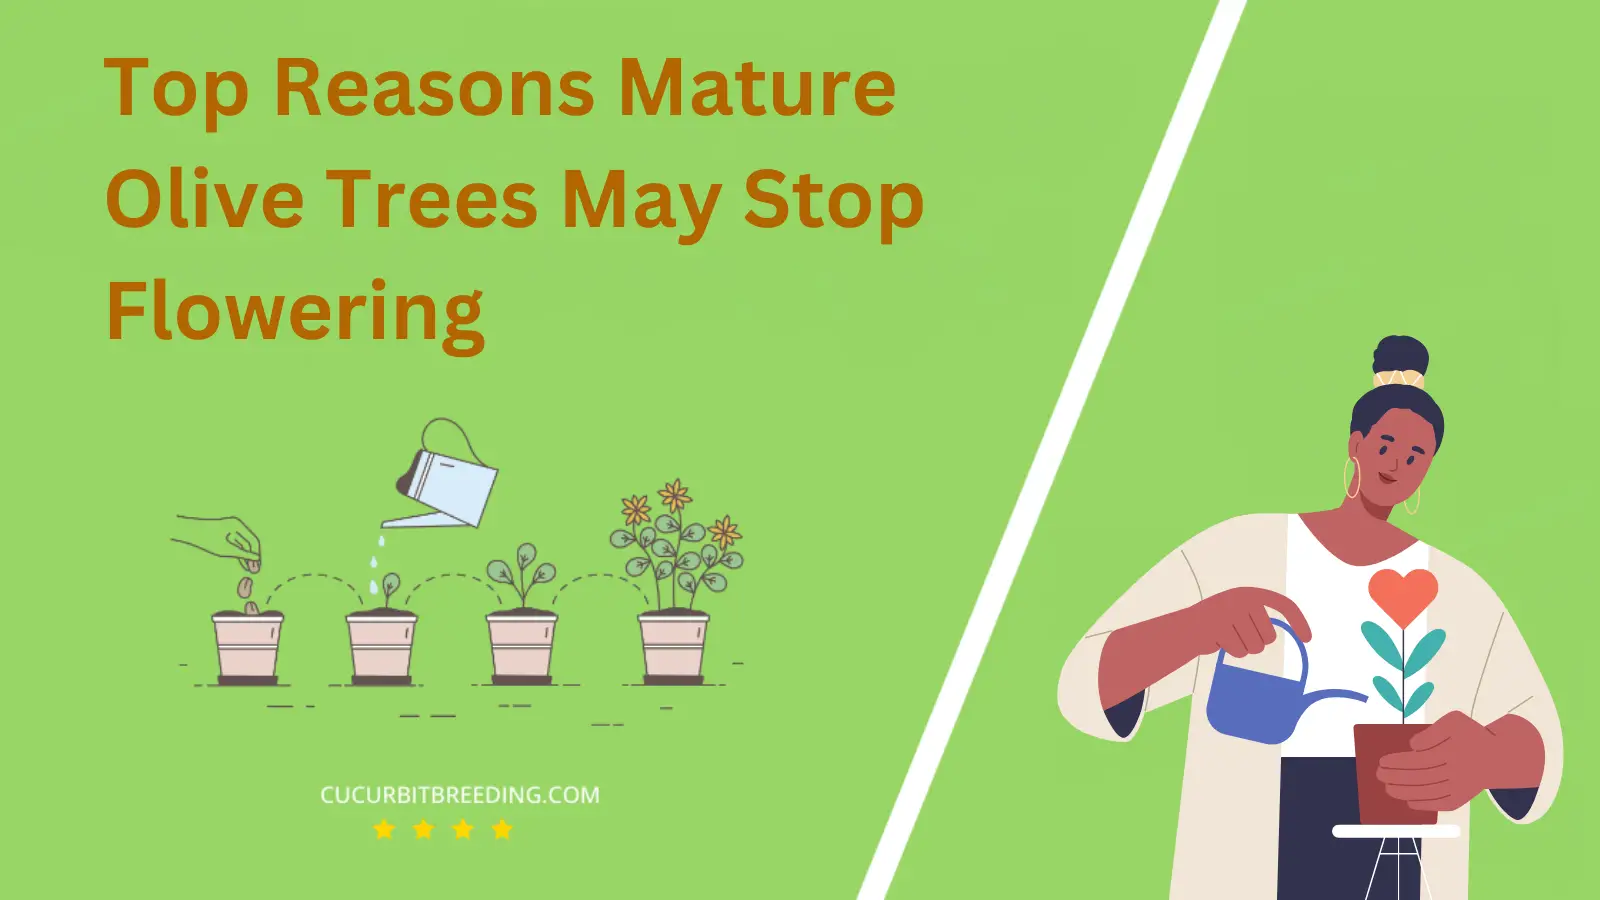 Top Reasons Mature Olive Trees May Stop Flowering